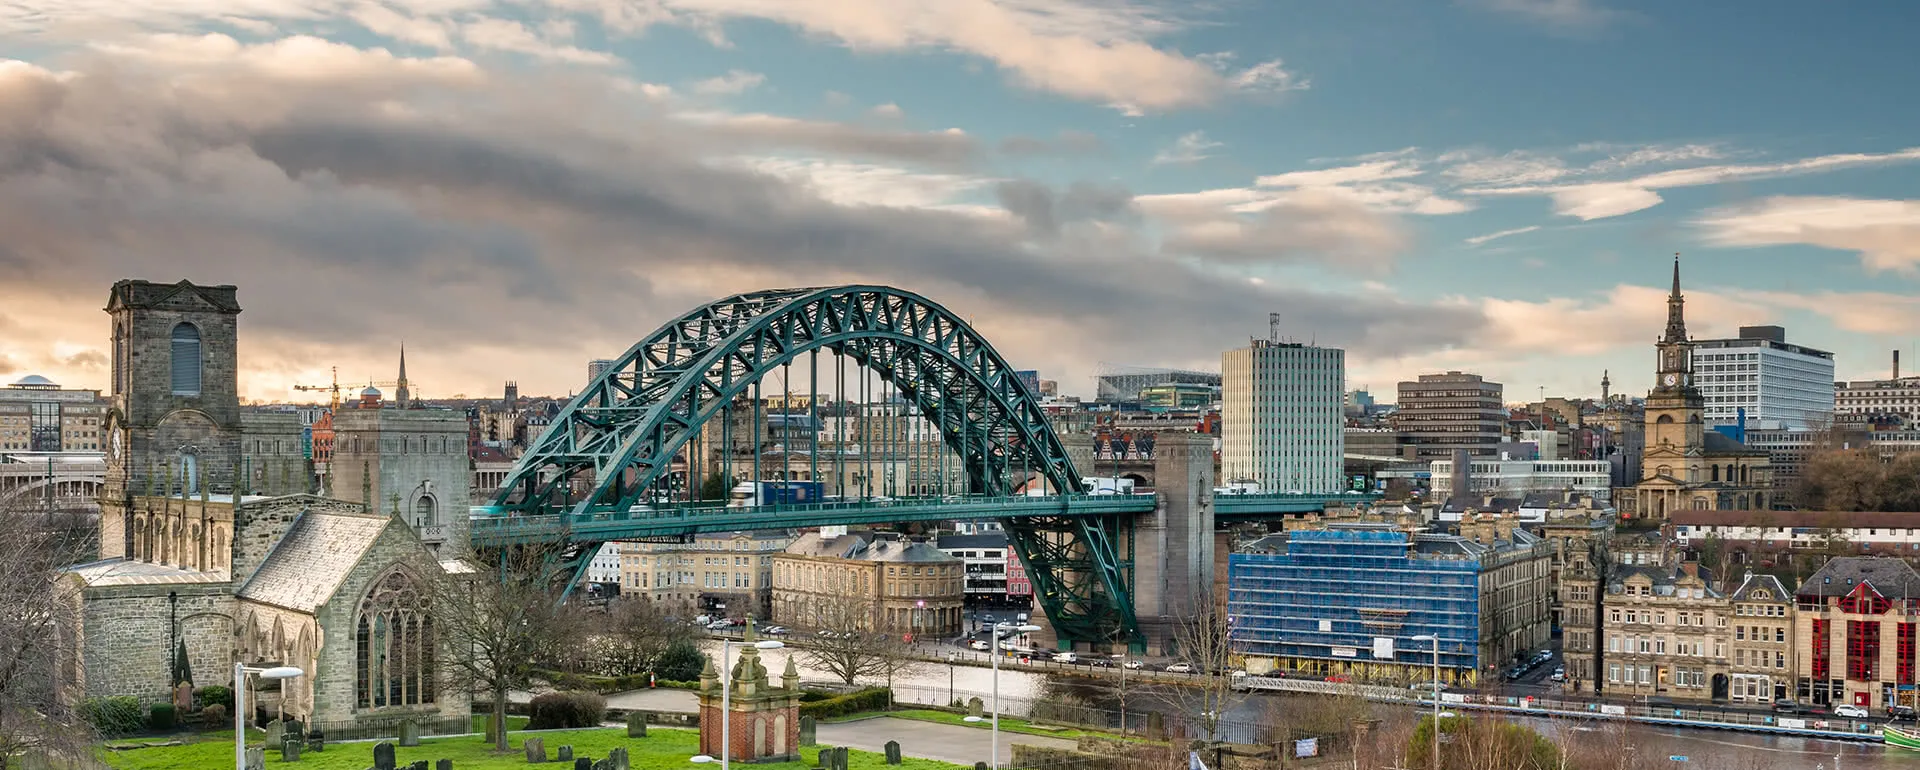 Newcastle upon Tyne - the destination for company trips